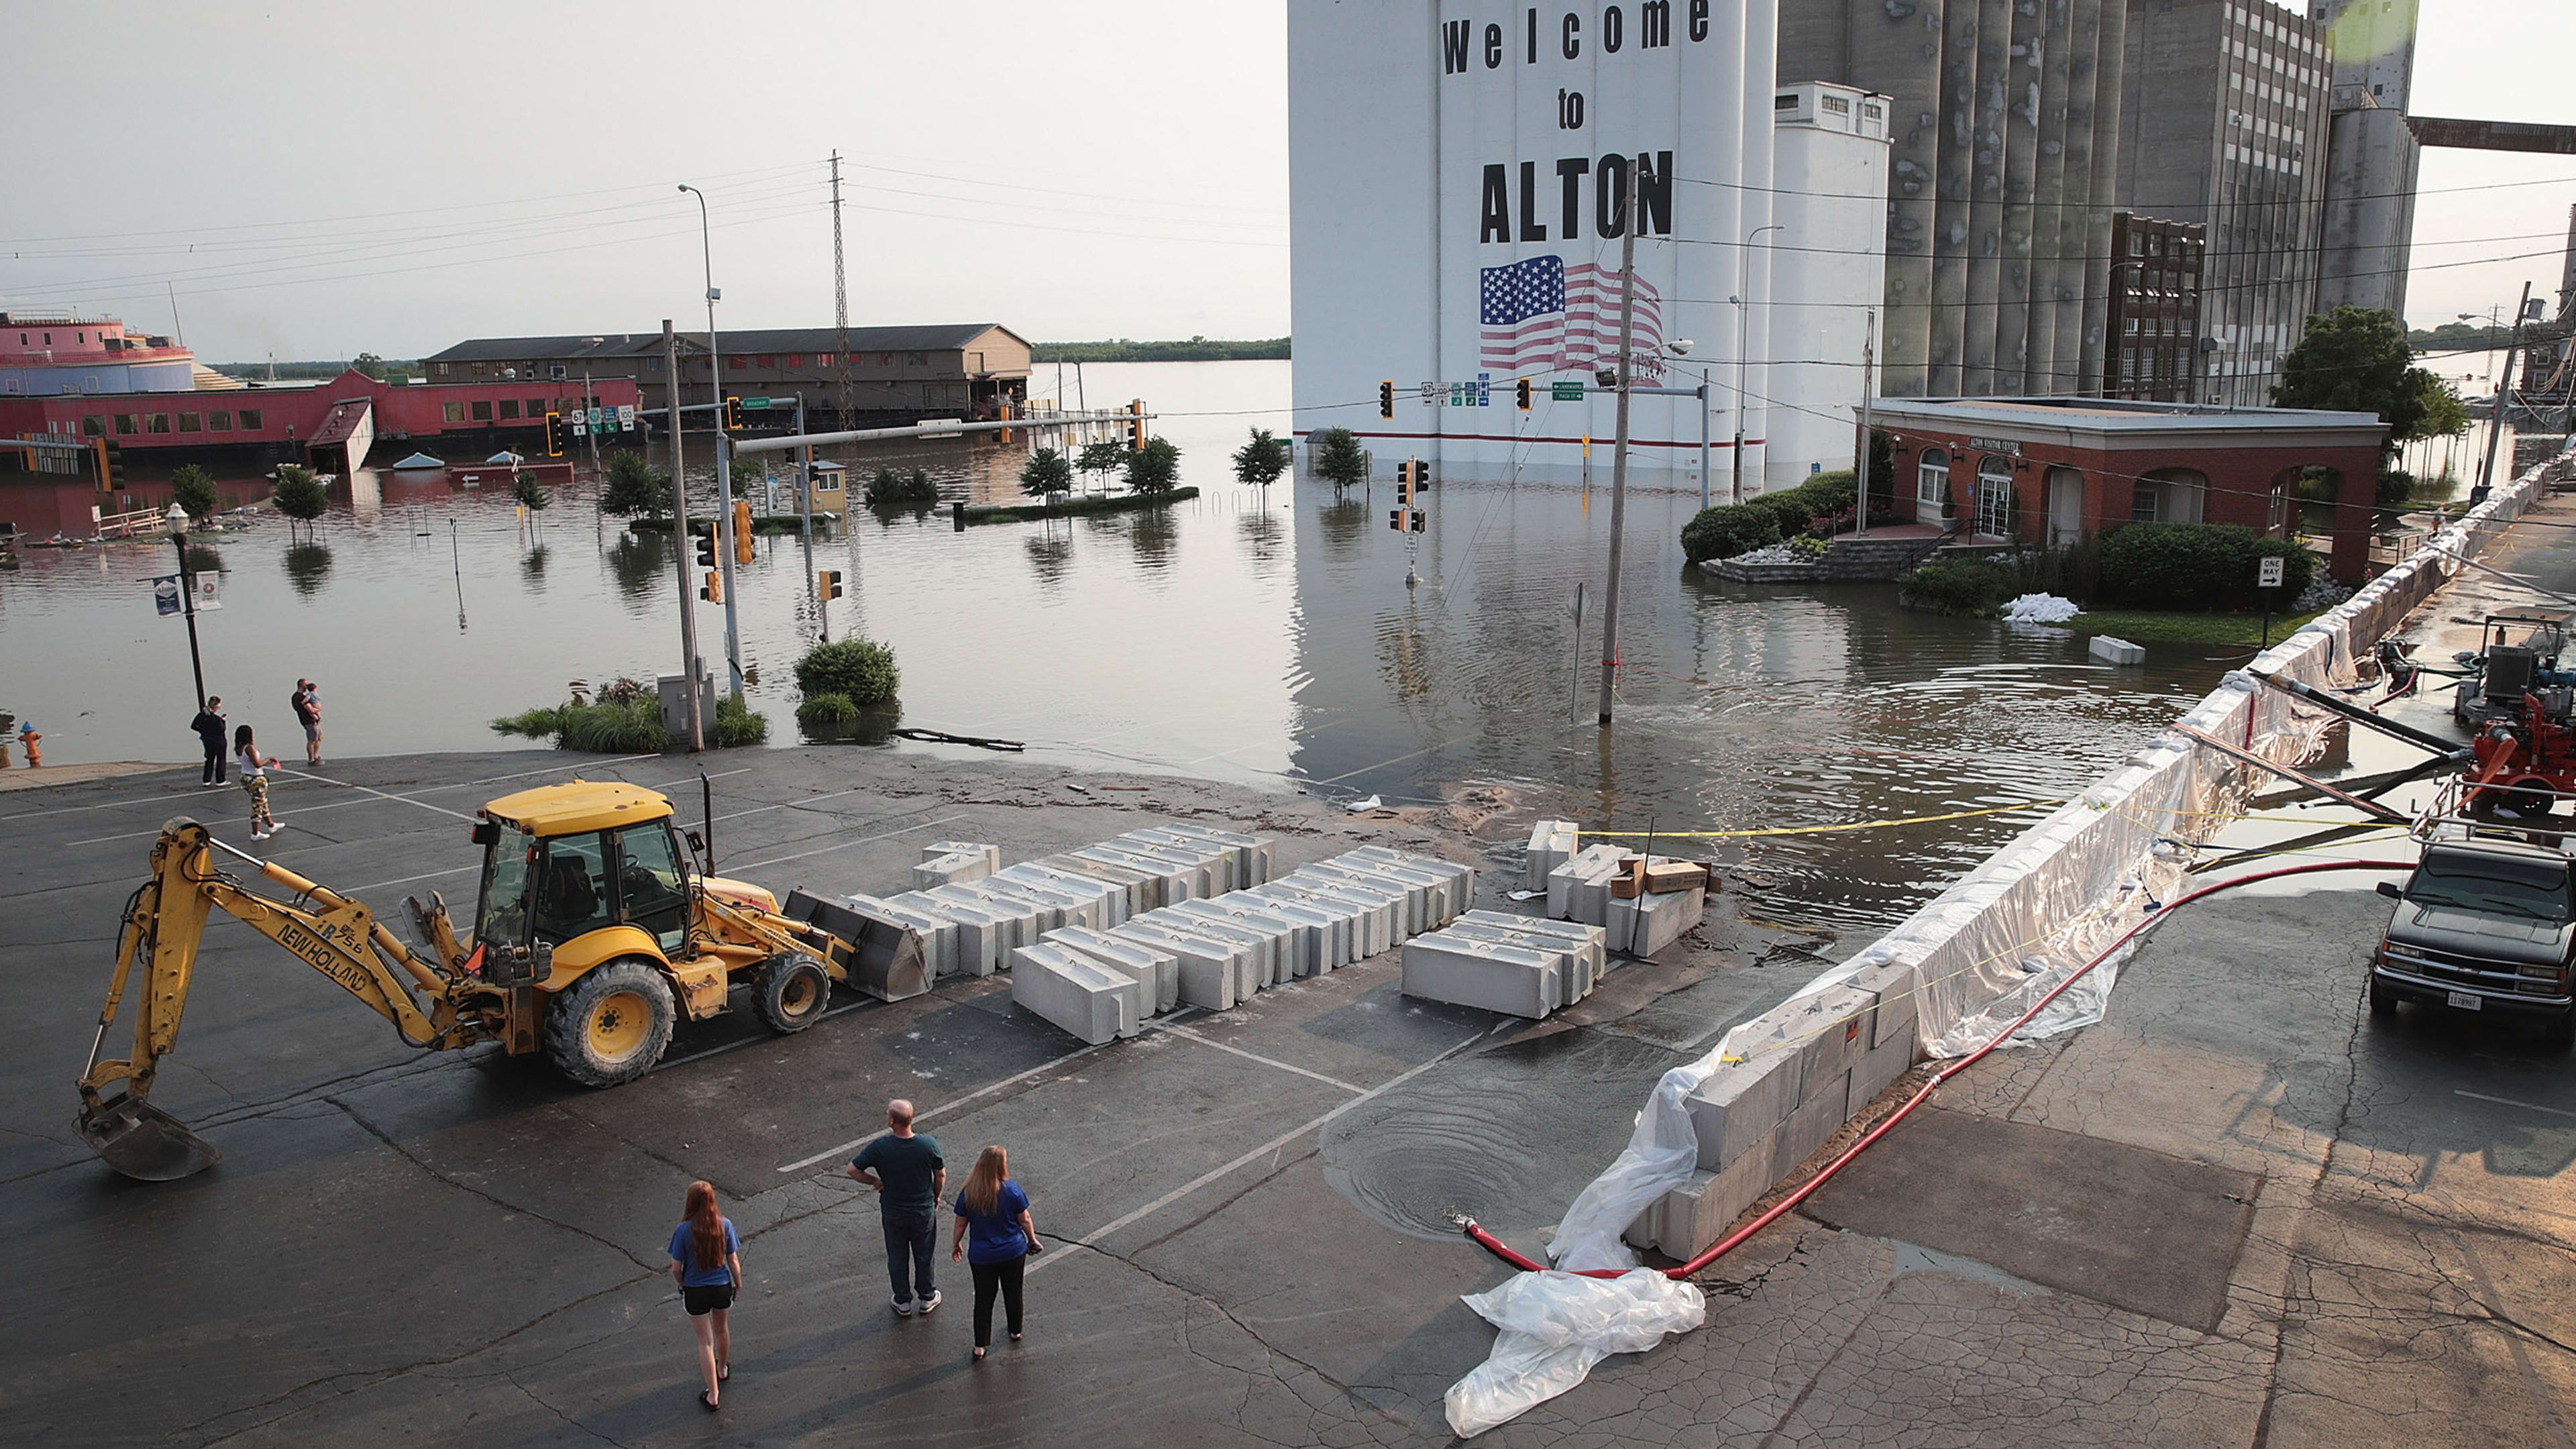 Watching their community get destroyed by a flood helps convince people about climate change